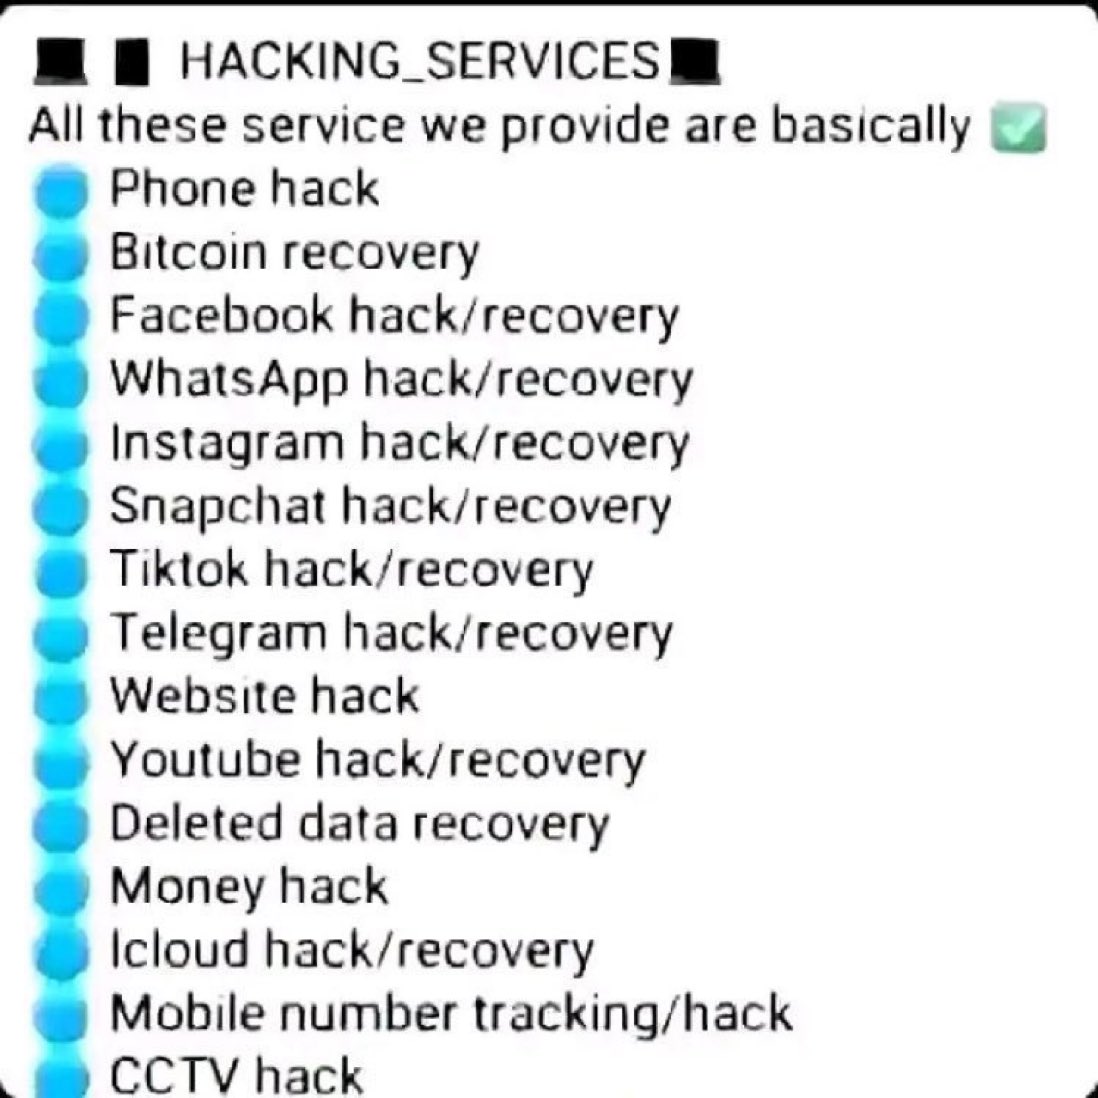 ALL THESE SERVICE WE PROVIDE ARE BASICALLY✅
#hireahacker #spy #media #recovery #recover #hacking #hackers #2factorauthetification #2factorbypass #cryptocrash #bitcoinsrecovery #tracking #snoopy #박정우랑같이비긴어게인 #job #QualityOverEverything #hackedinstagram #facebookdown